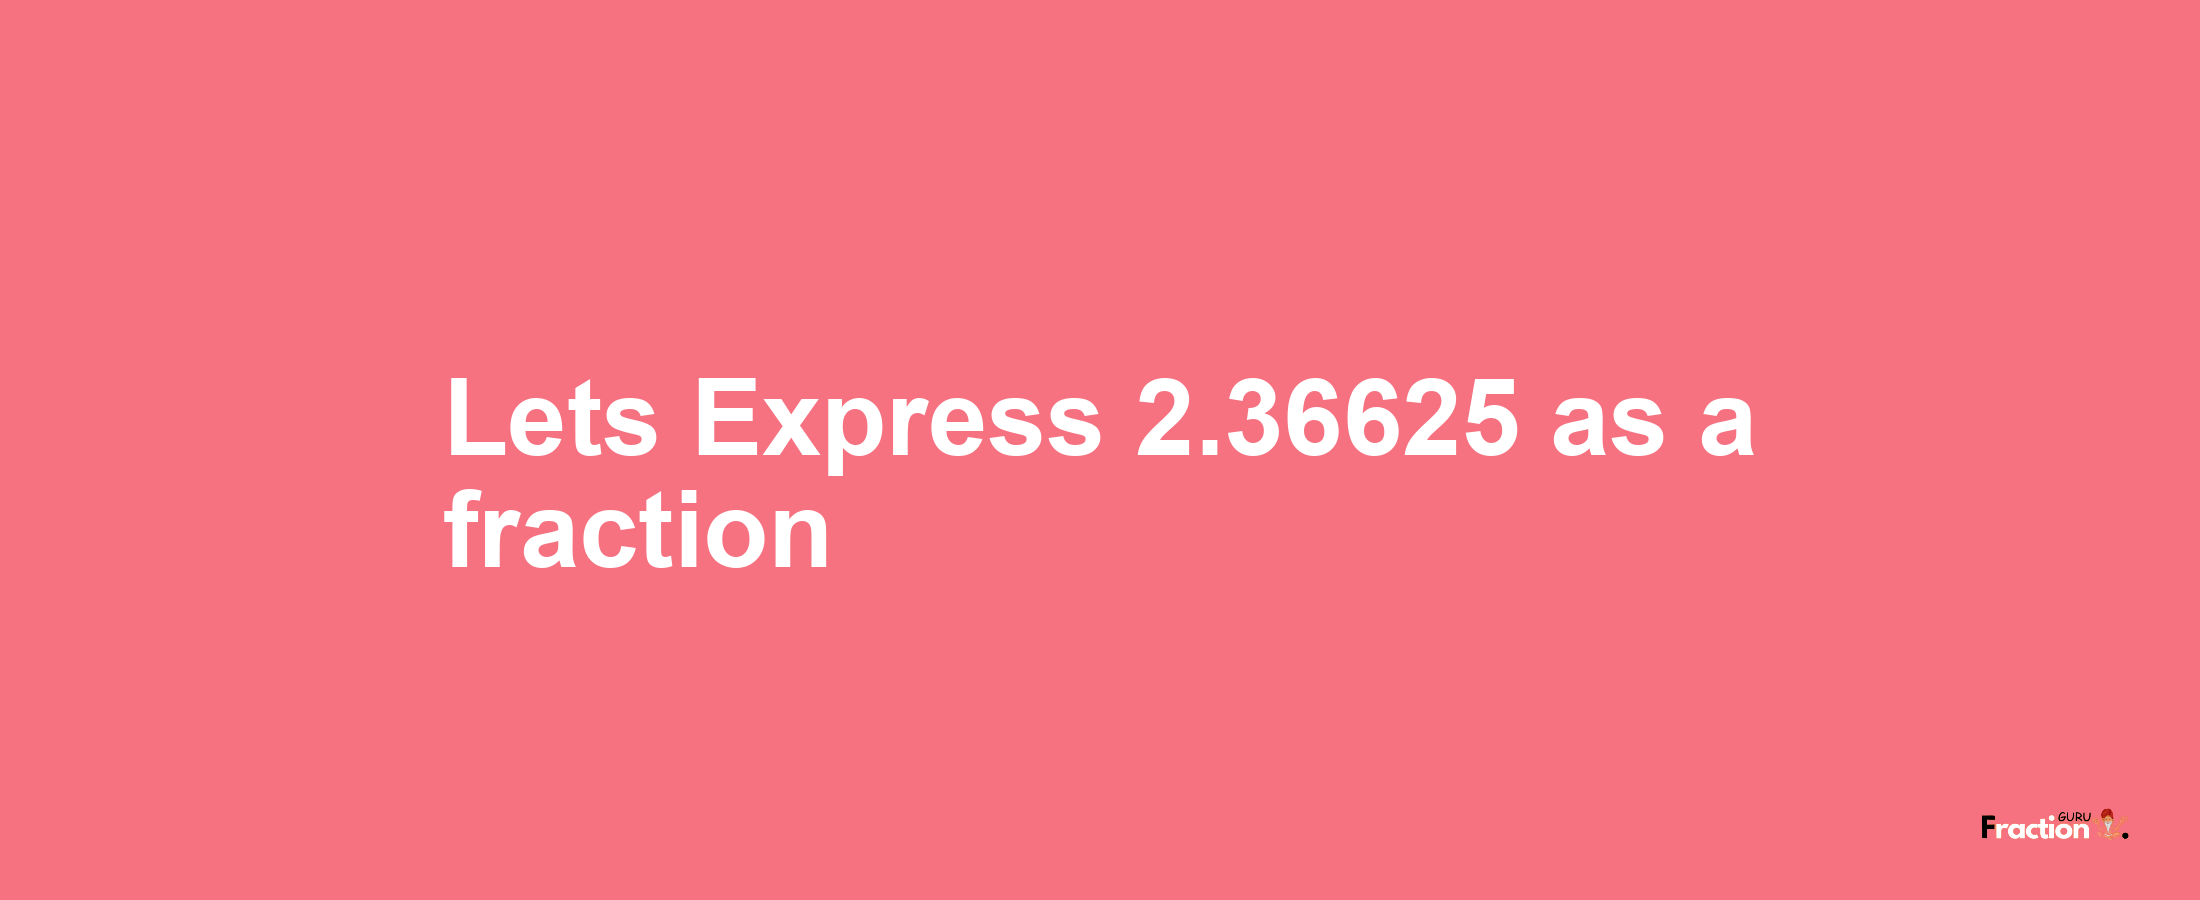 Lets Express 2.36625 as afraction